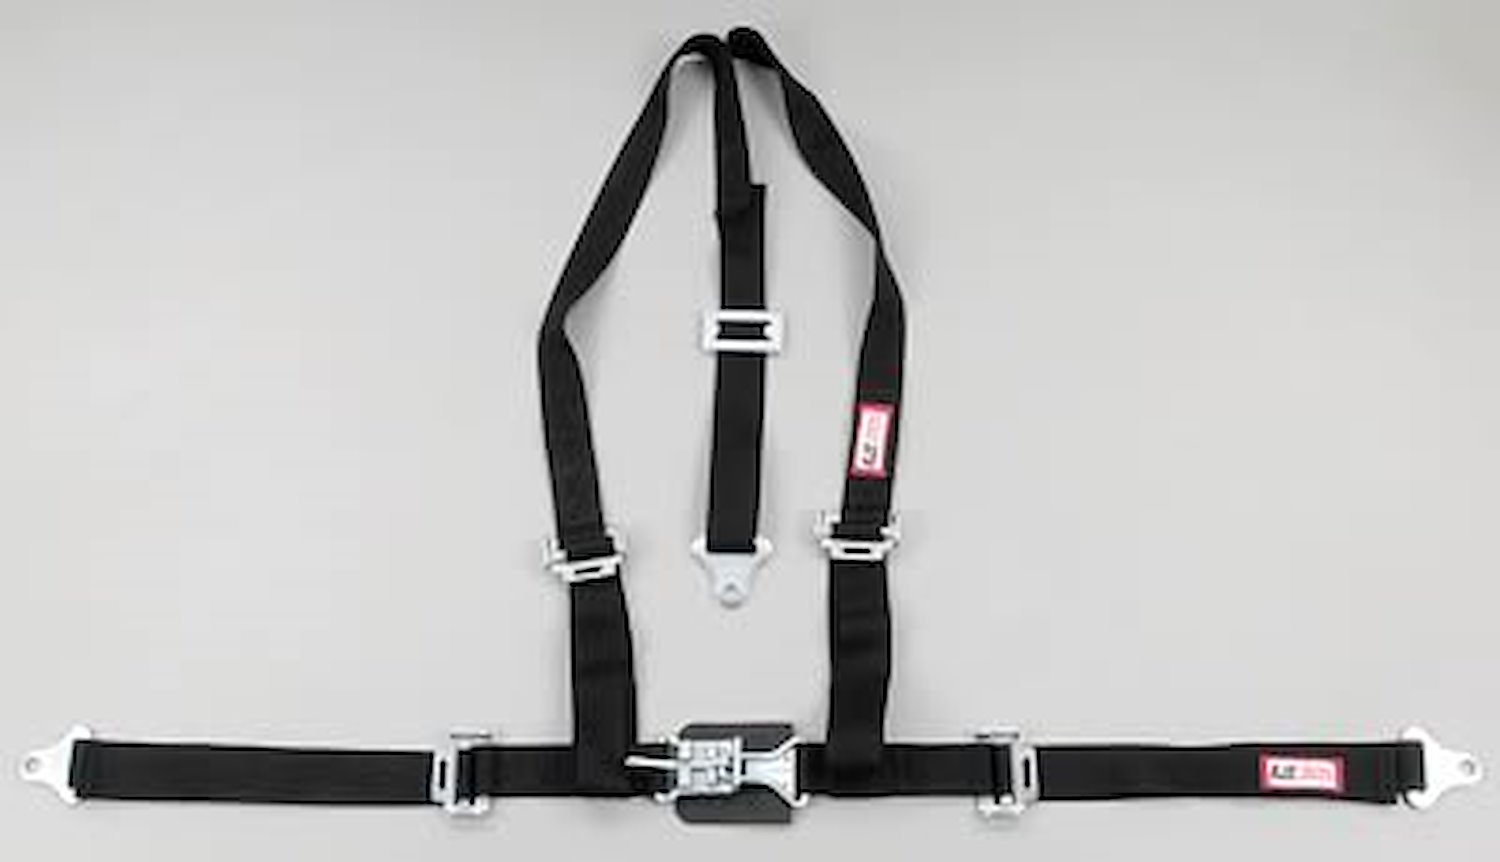 NON-SFI L&L HARNESS 3 PULL UP Lap BELT SNAP SEWN IN 2 S.H. Y FLOOR Mount WRAP/BOLT RED